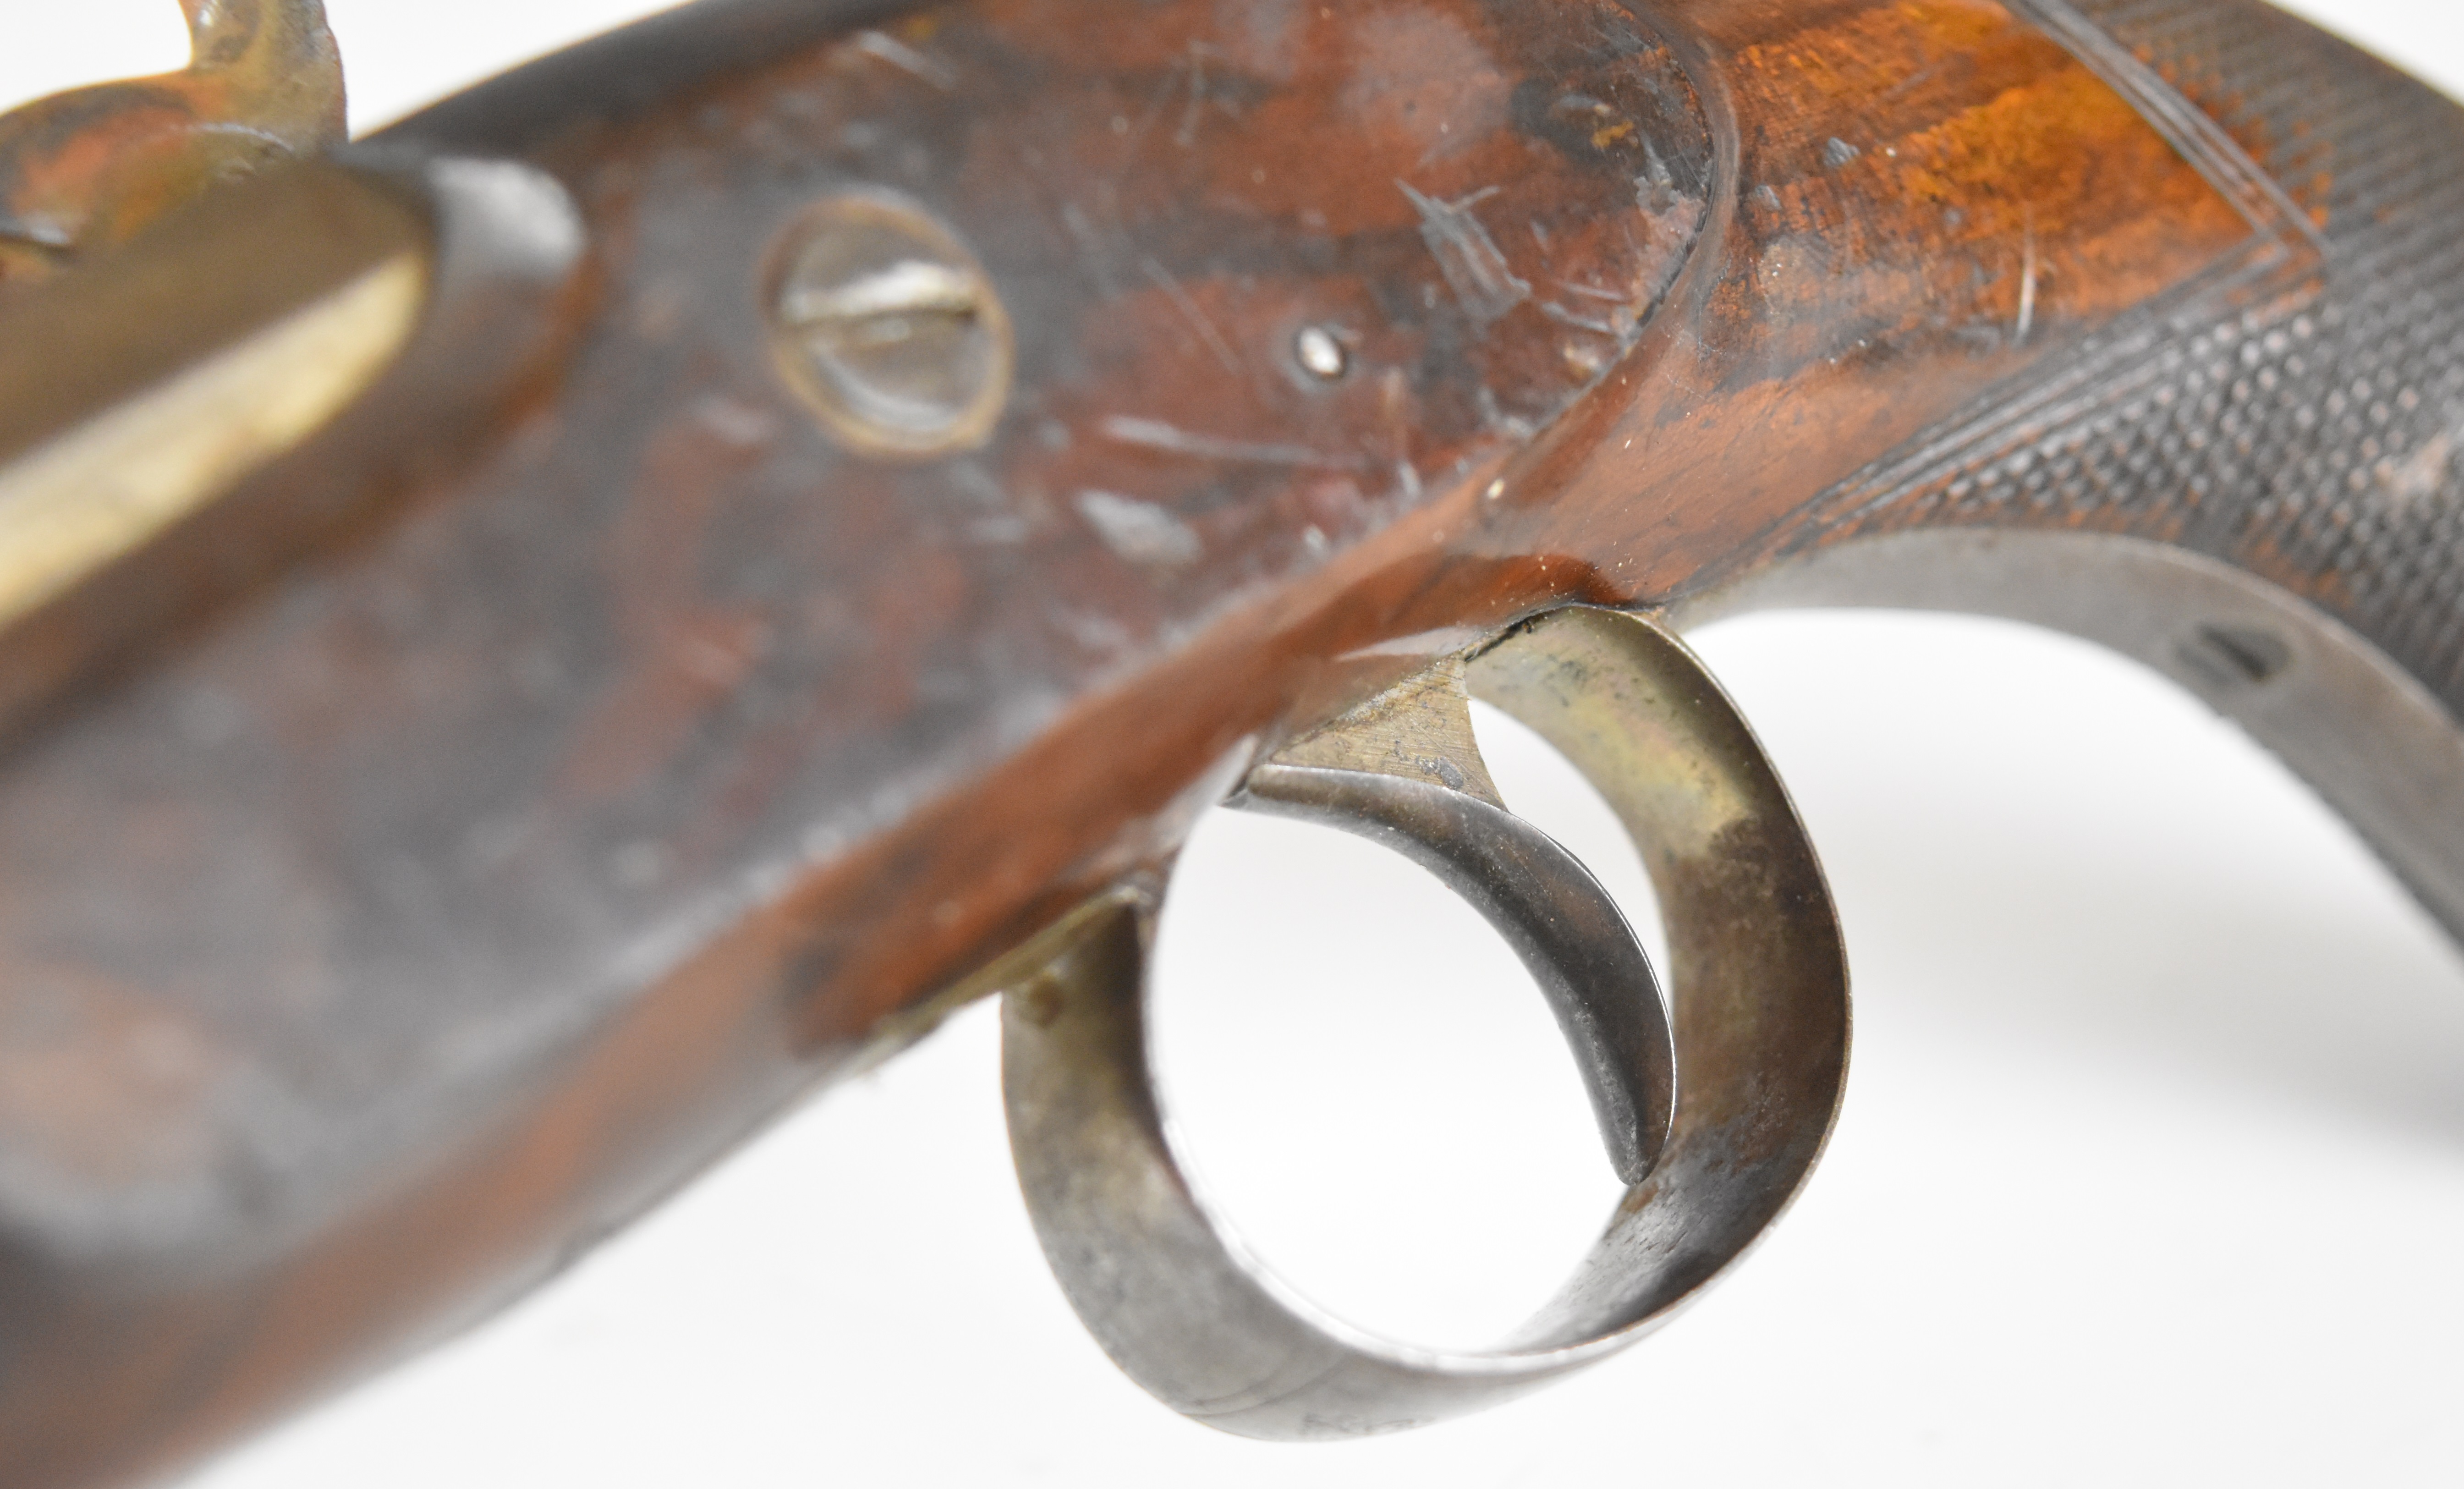 Bentley of London 36 bore percussion hammer action coat pistol with engraved lock, hammer, trigger - Image 6 of 10